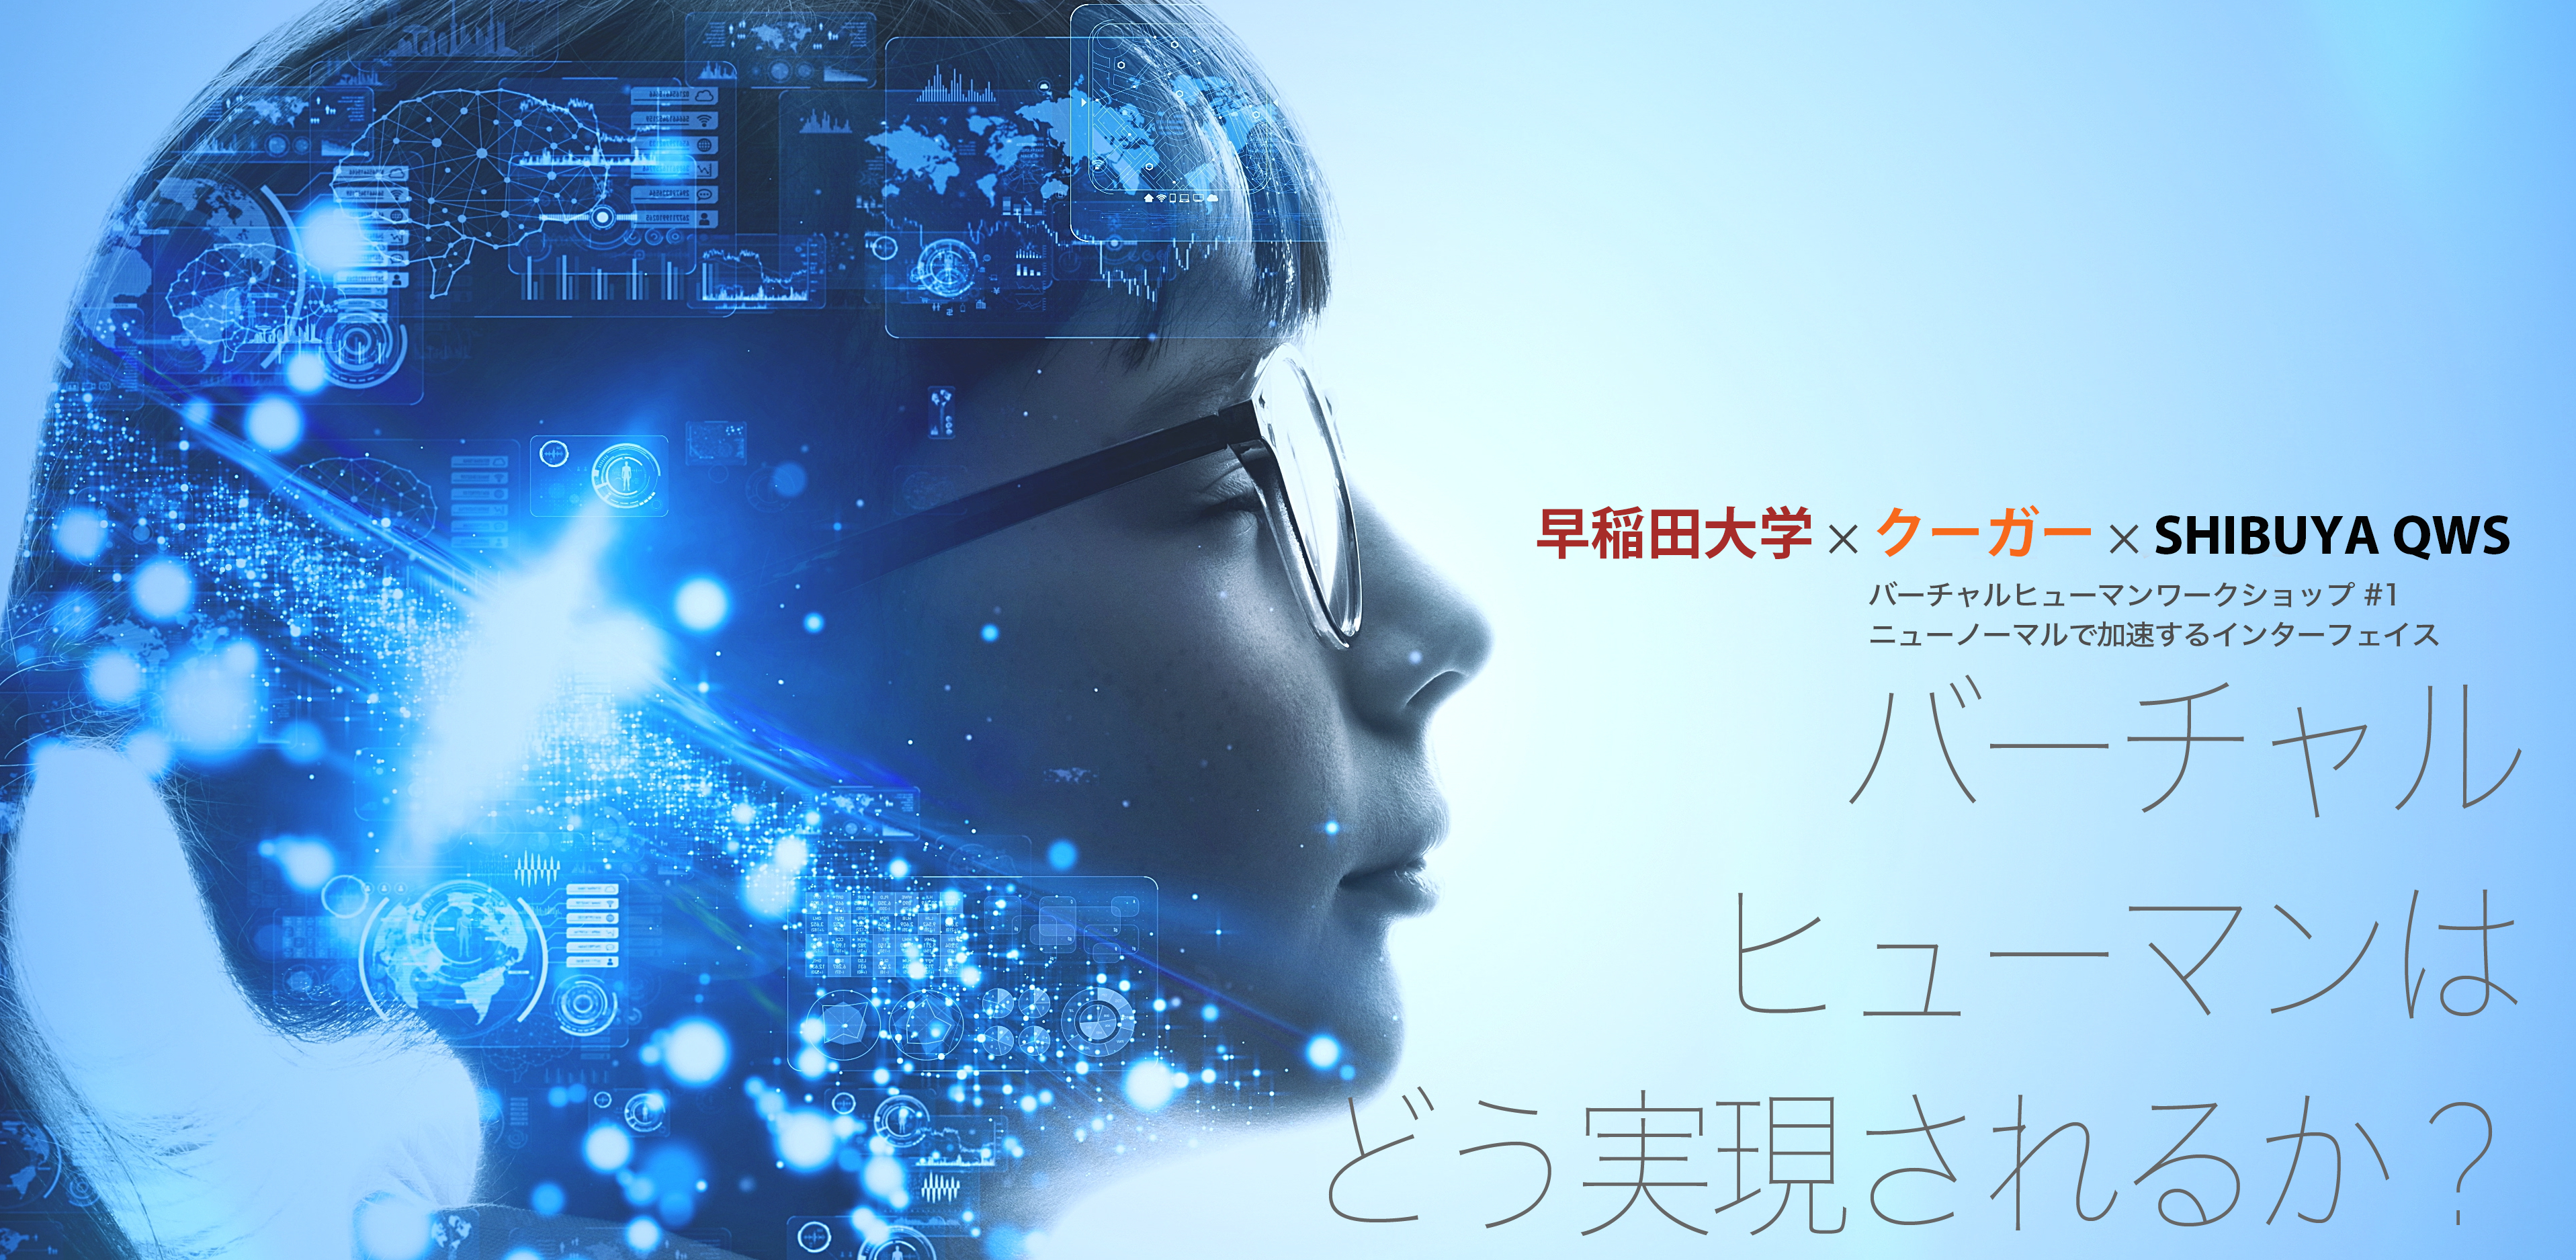 Waseda University and Couger hosted a "Virtual Human Workshop" with over 100 in attendance